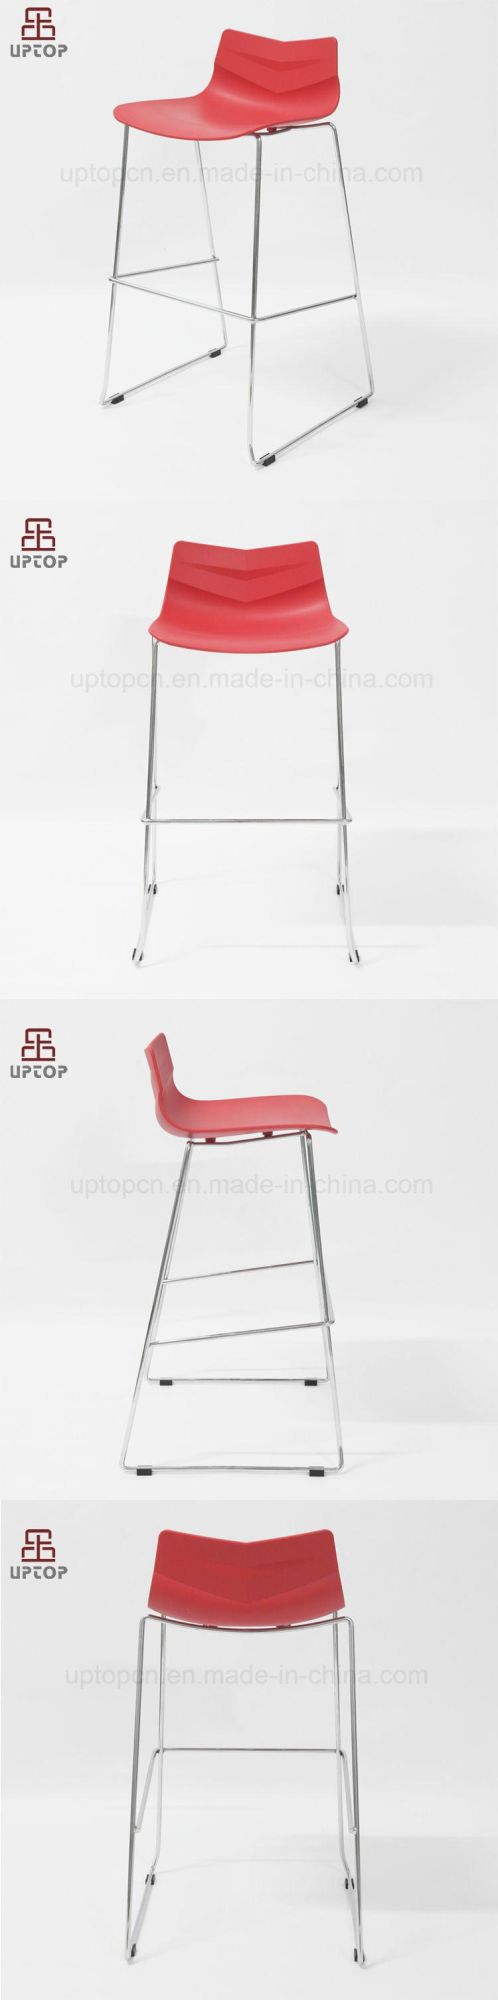 Colorful Modern Plastic Barstool Chair with Chrome Steel Leg (SP-BS326)